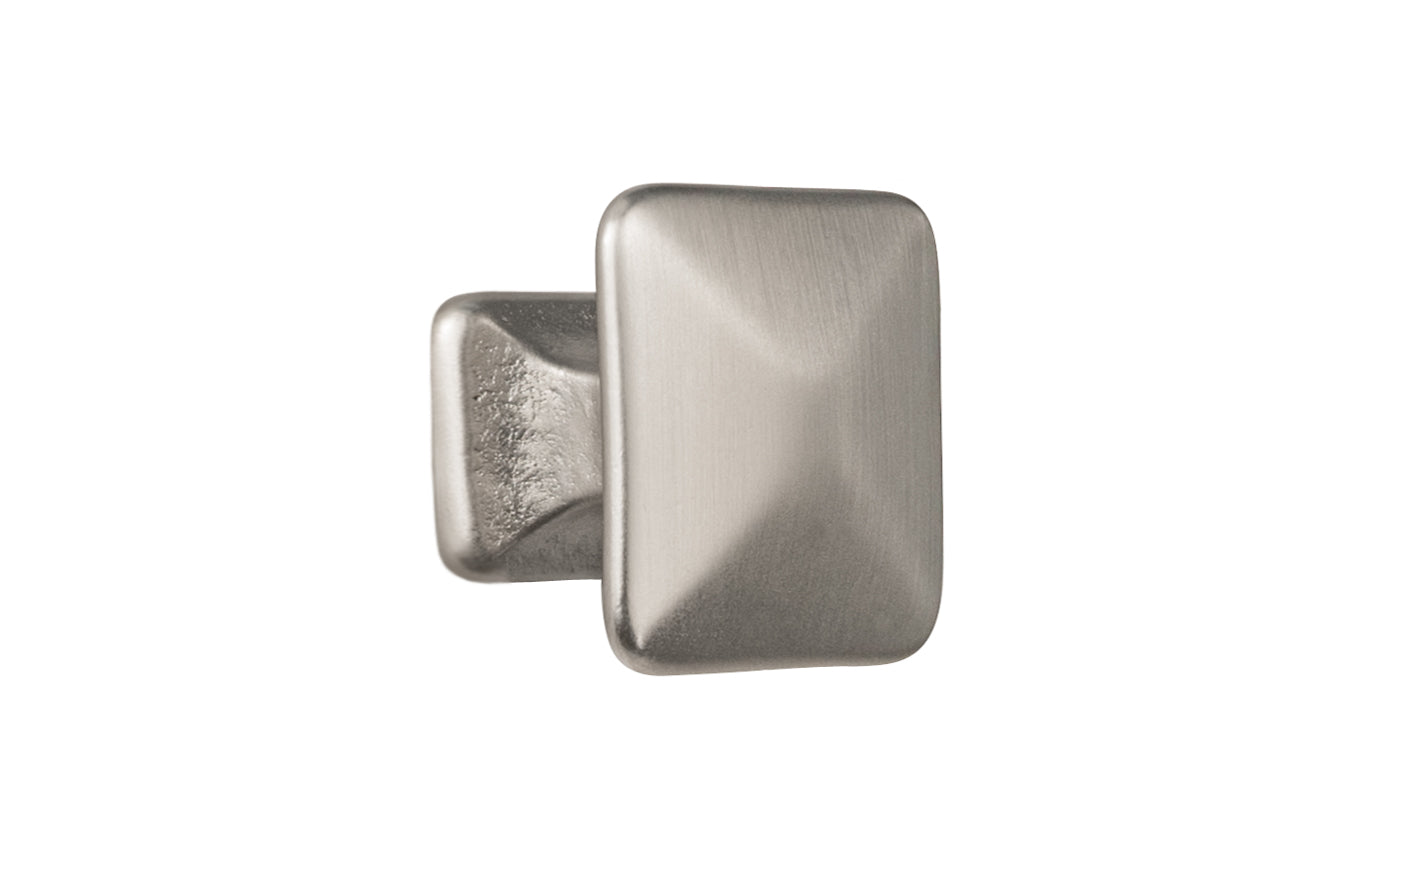 Vintage-style Hardware · Solid Brass Pyramid Shape Square Cabinet Knob ~ 1" size knob. Made of solid brass, this stylish knob has a smooth & weighty feel. Mission-style, Arts & Crafts style of hardware. Brushed Nickel Finish